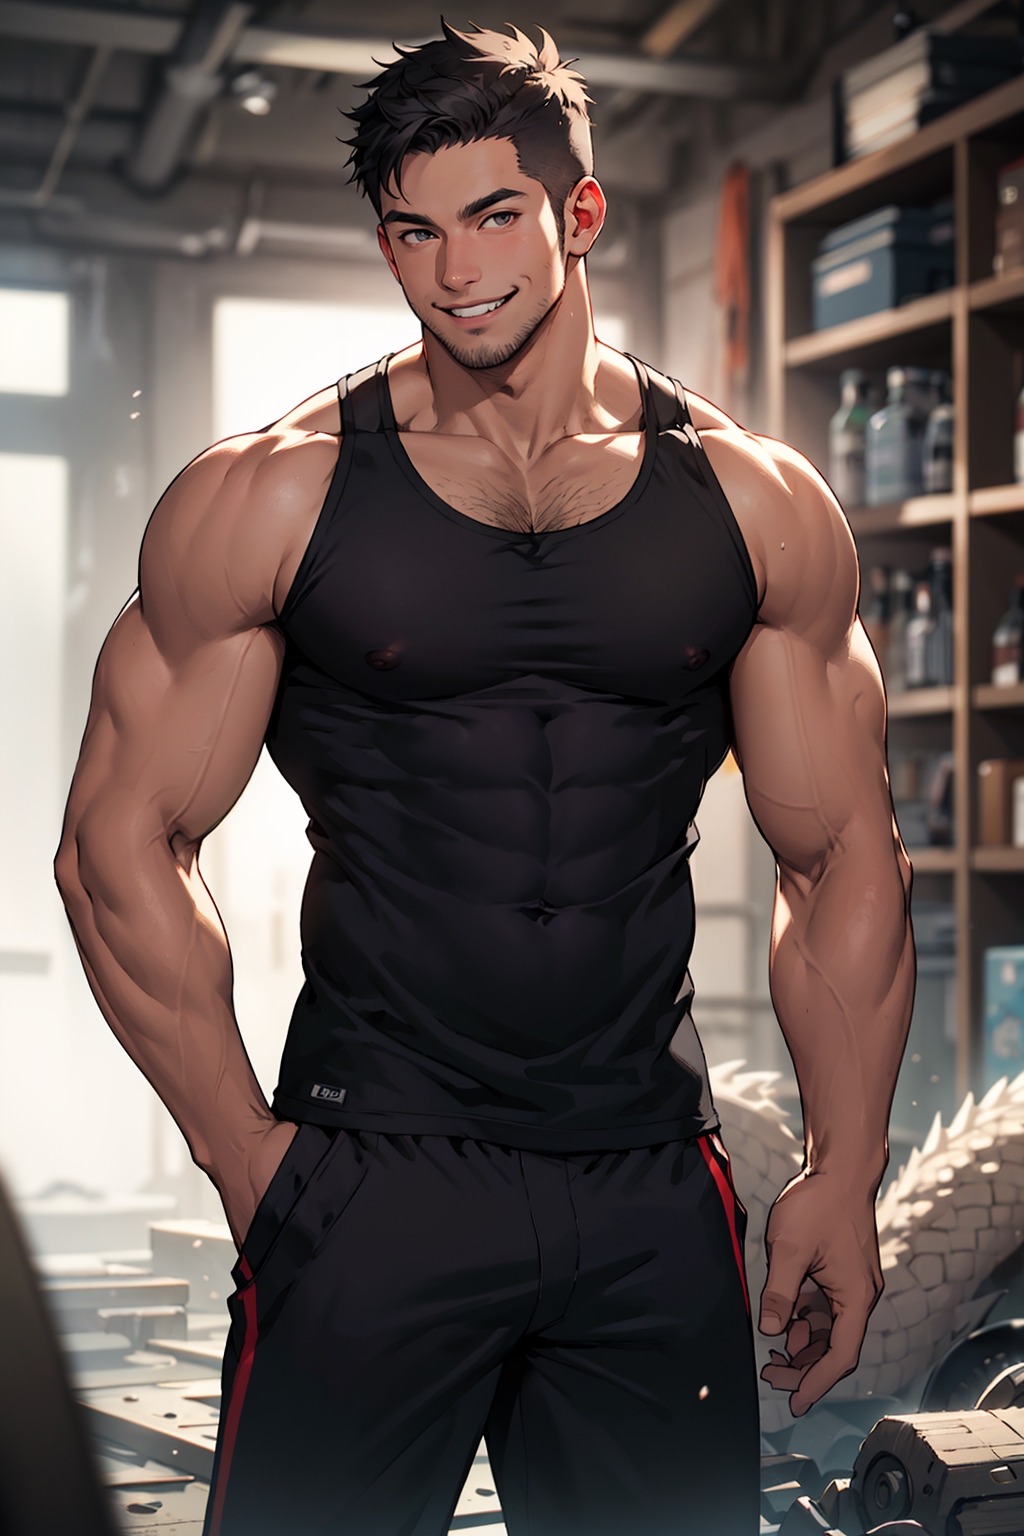 Top 40 Muscular Anime Guys That Makes You Wanna Hit The Gym - YouTube